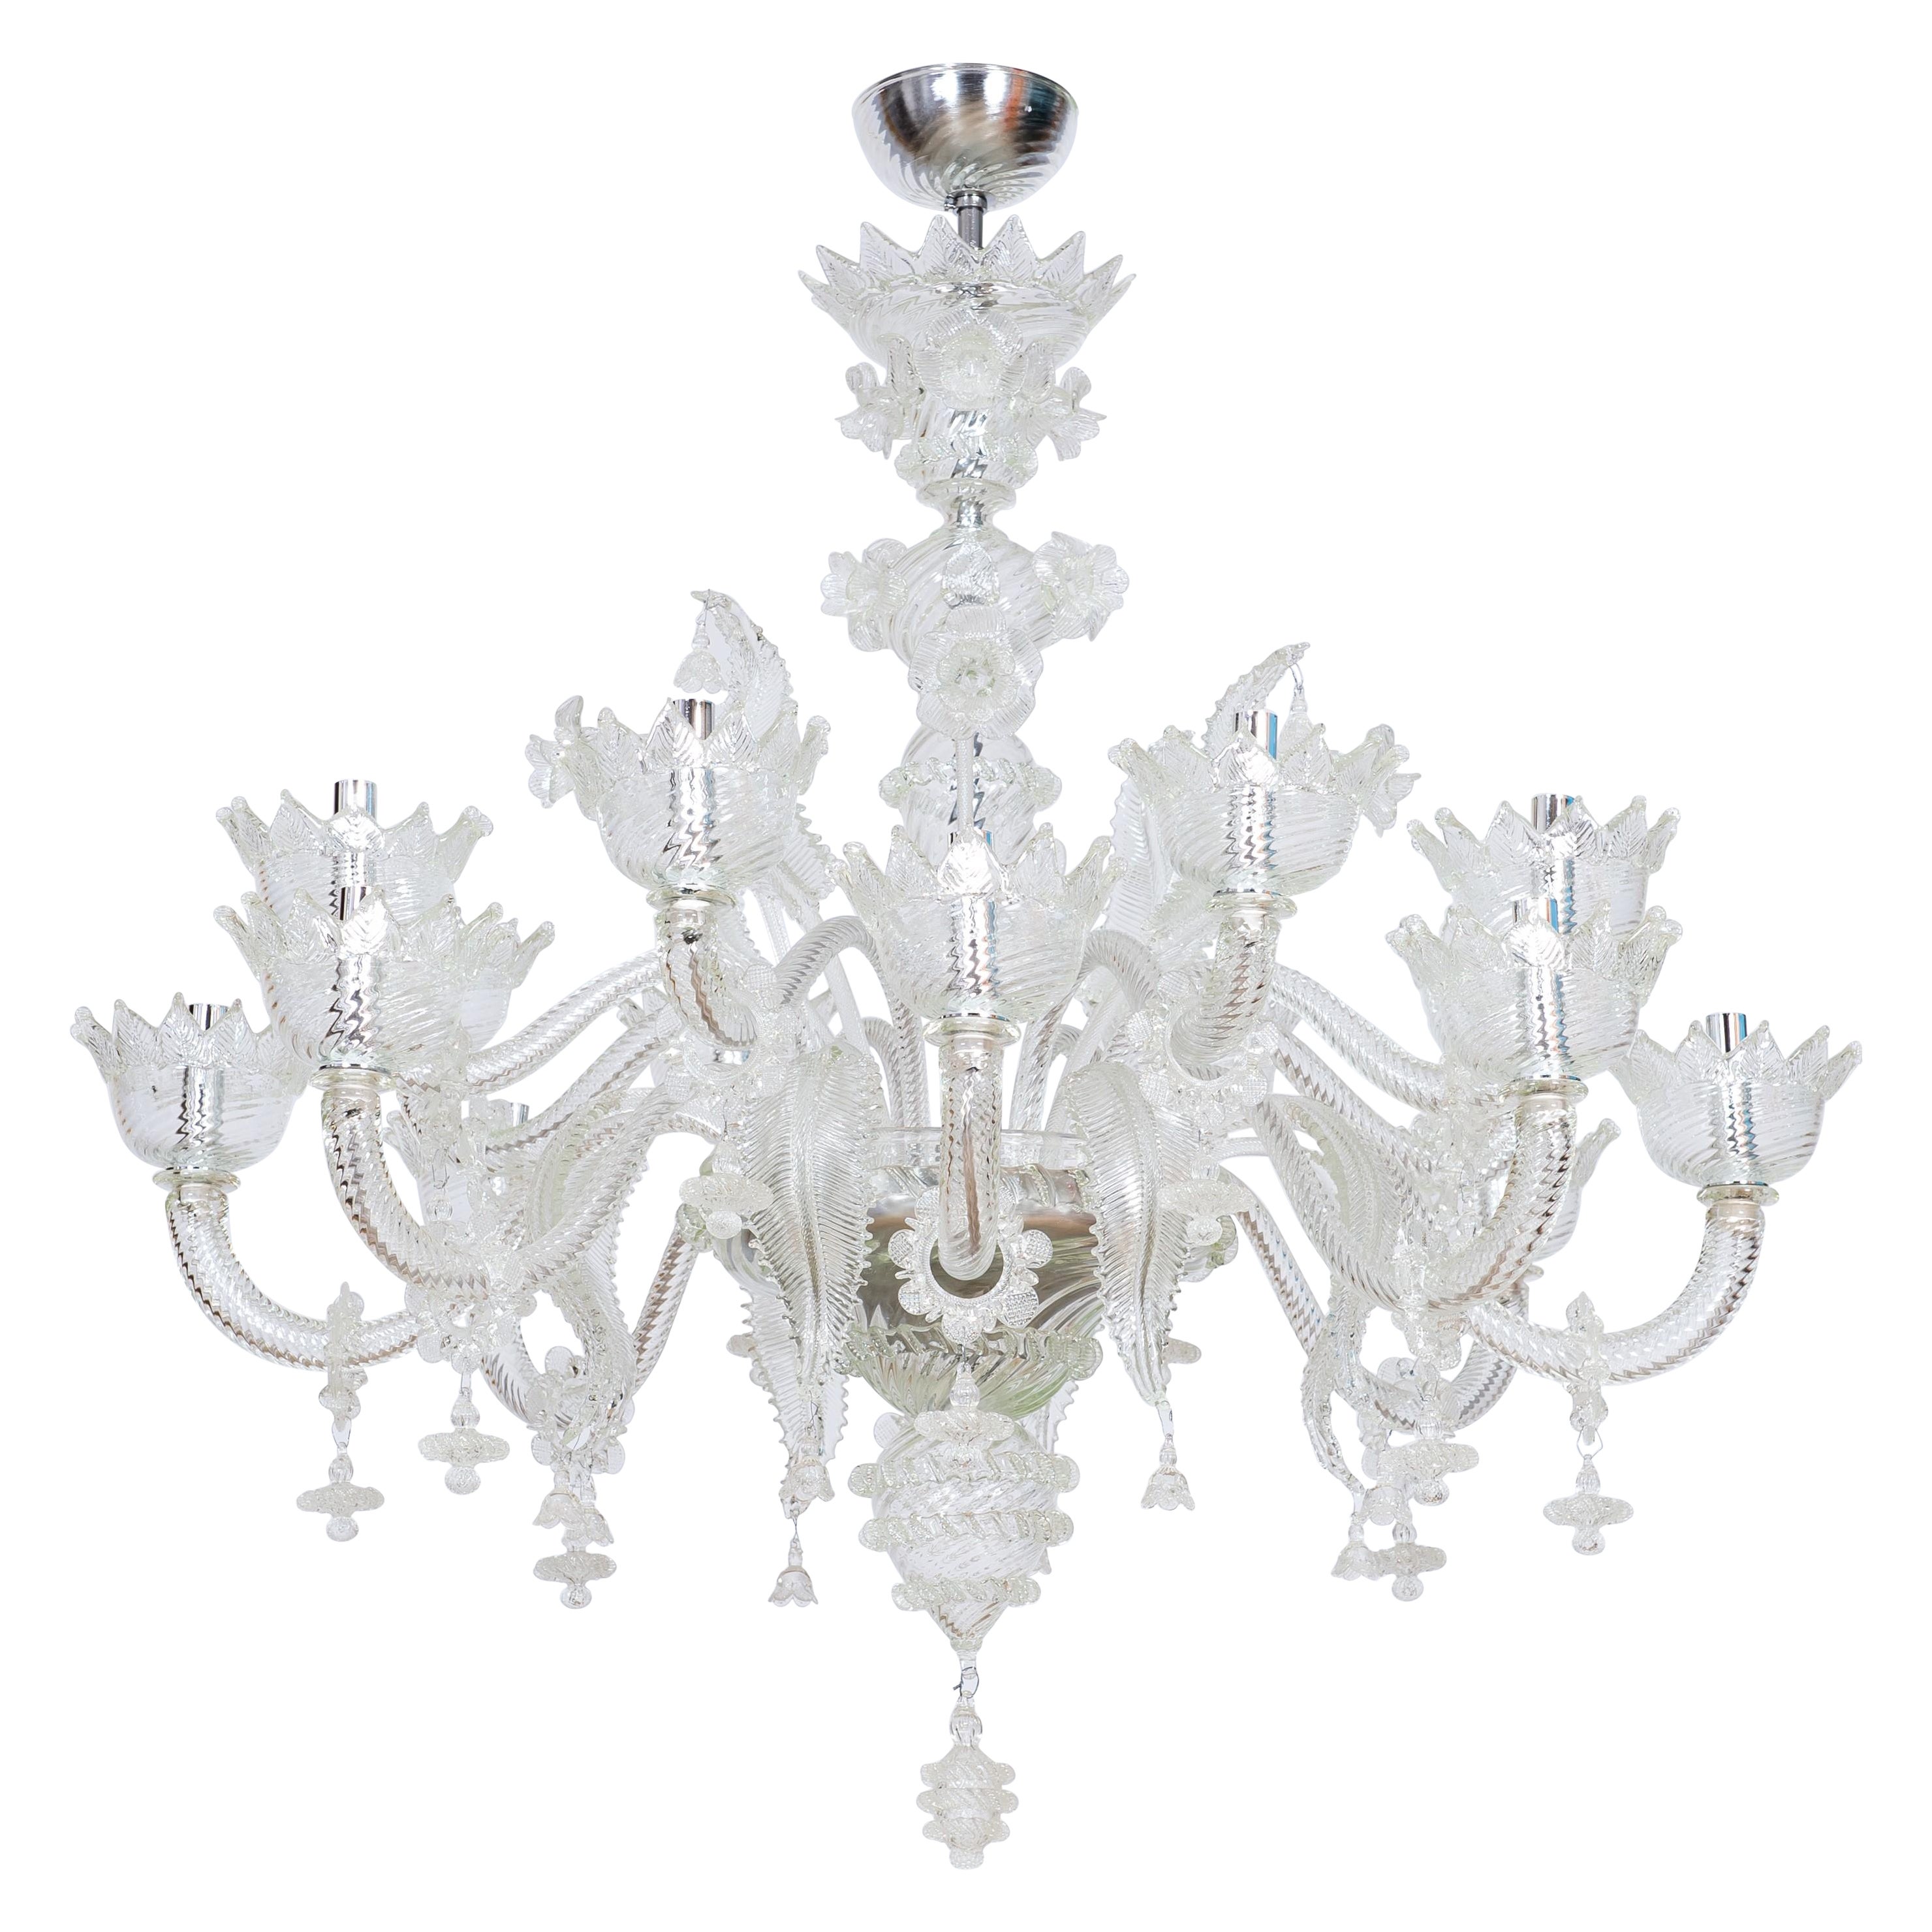 Transparent Venetian Murano Glass Chandelier with 16 Lights, 21st Century For Sale